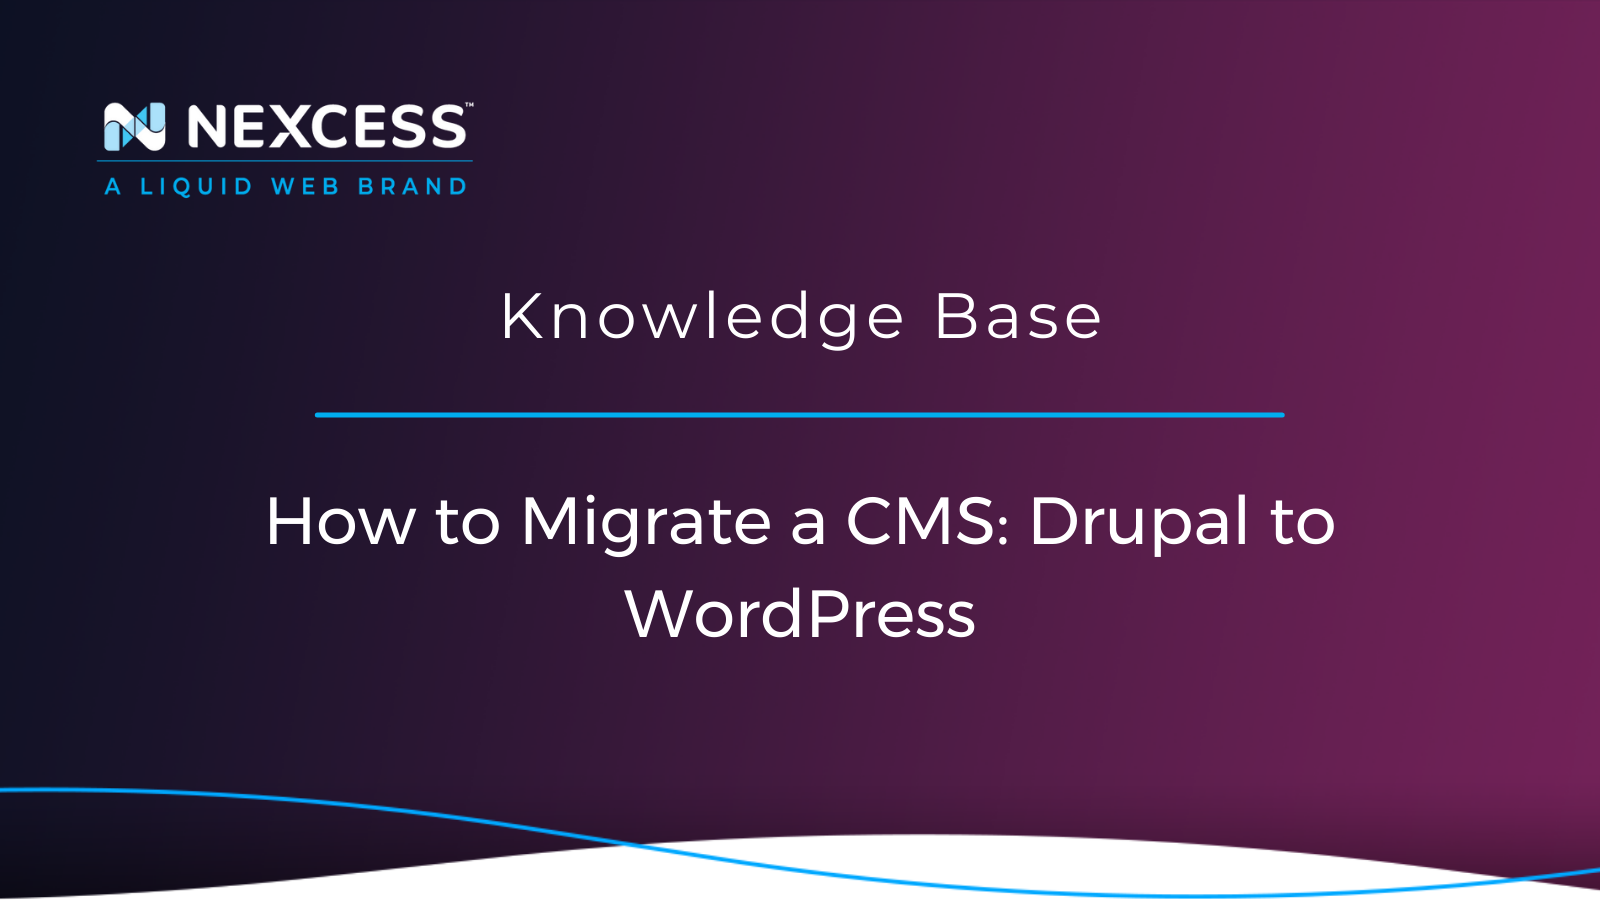 How to Migrate a CMS: Drupal to WordPress